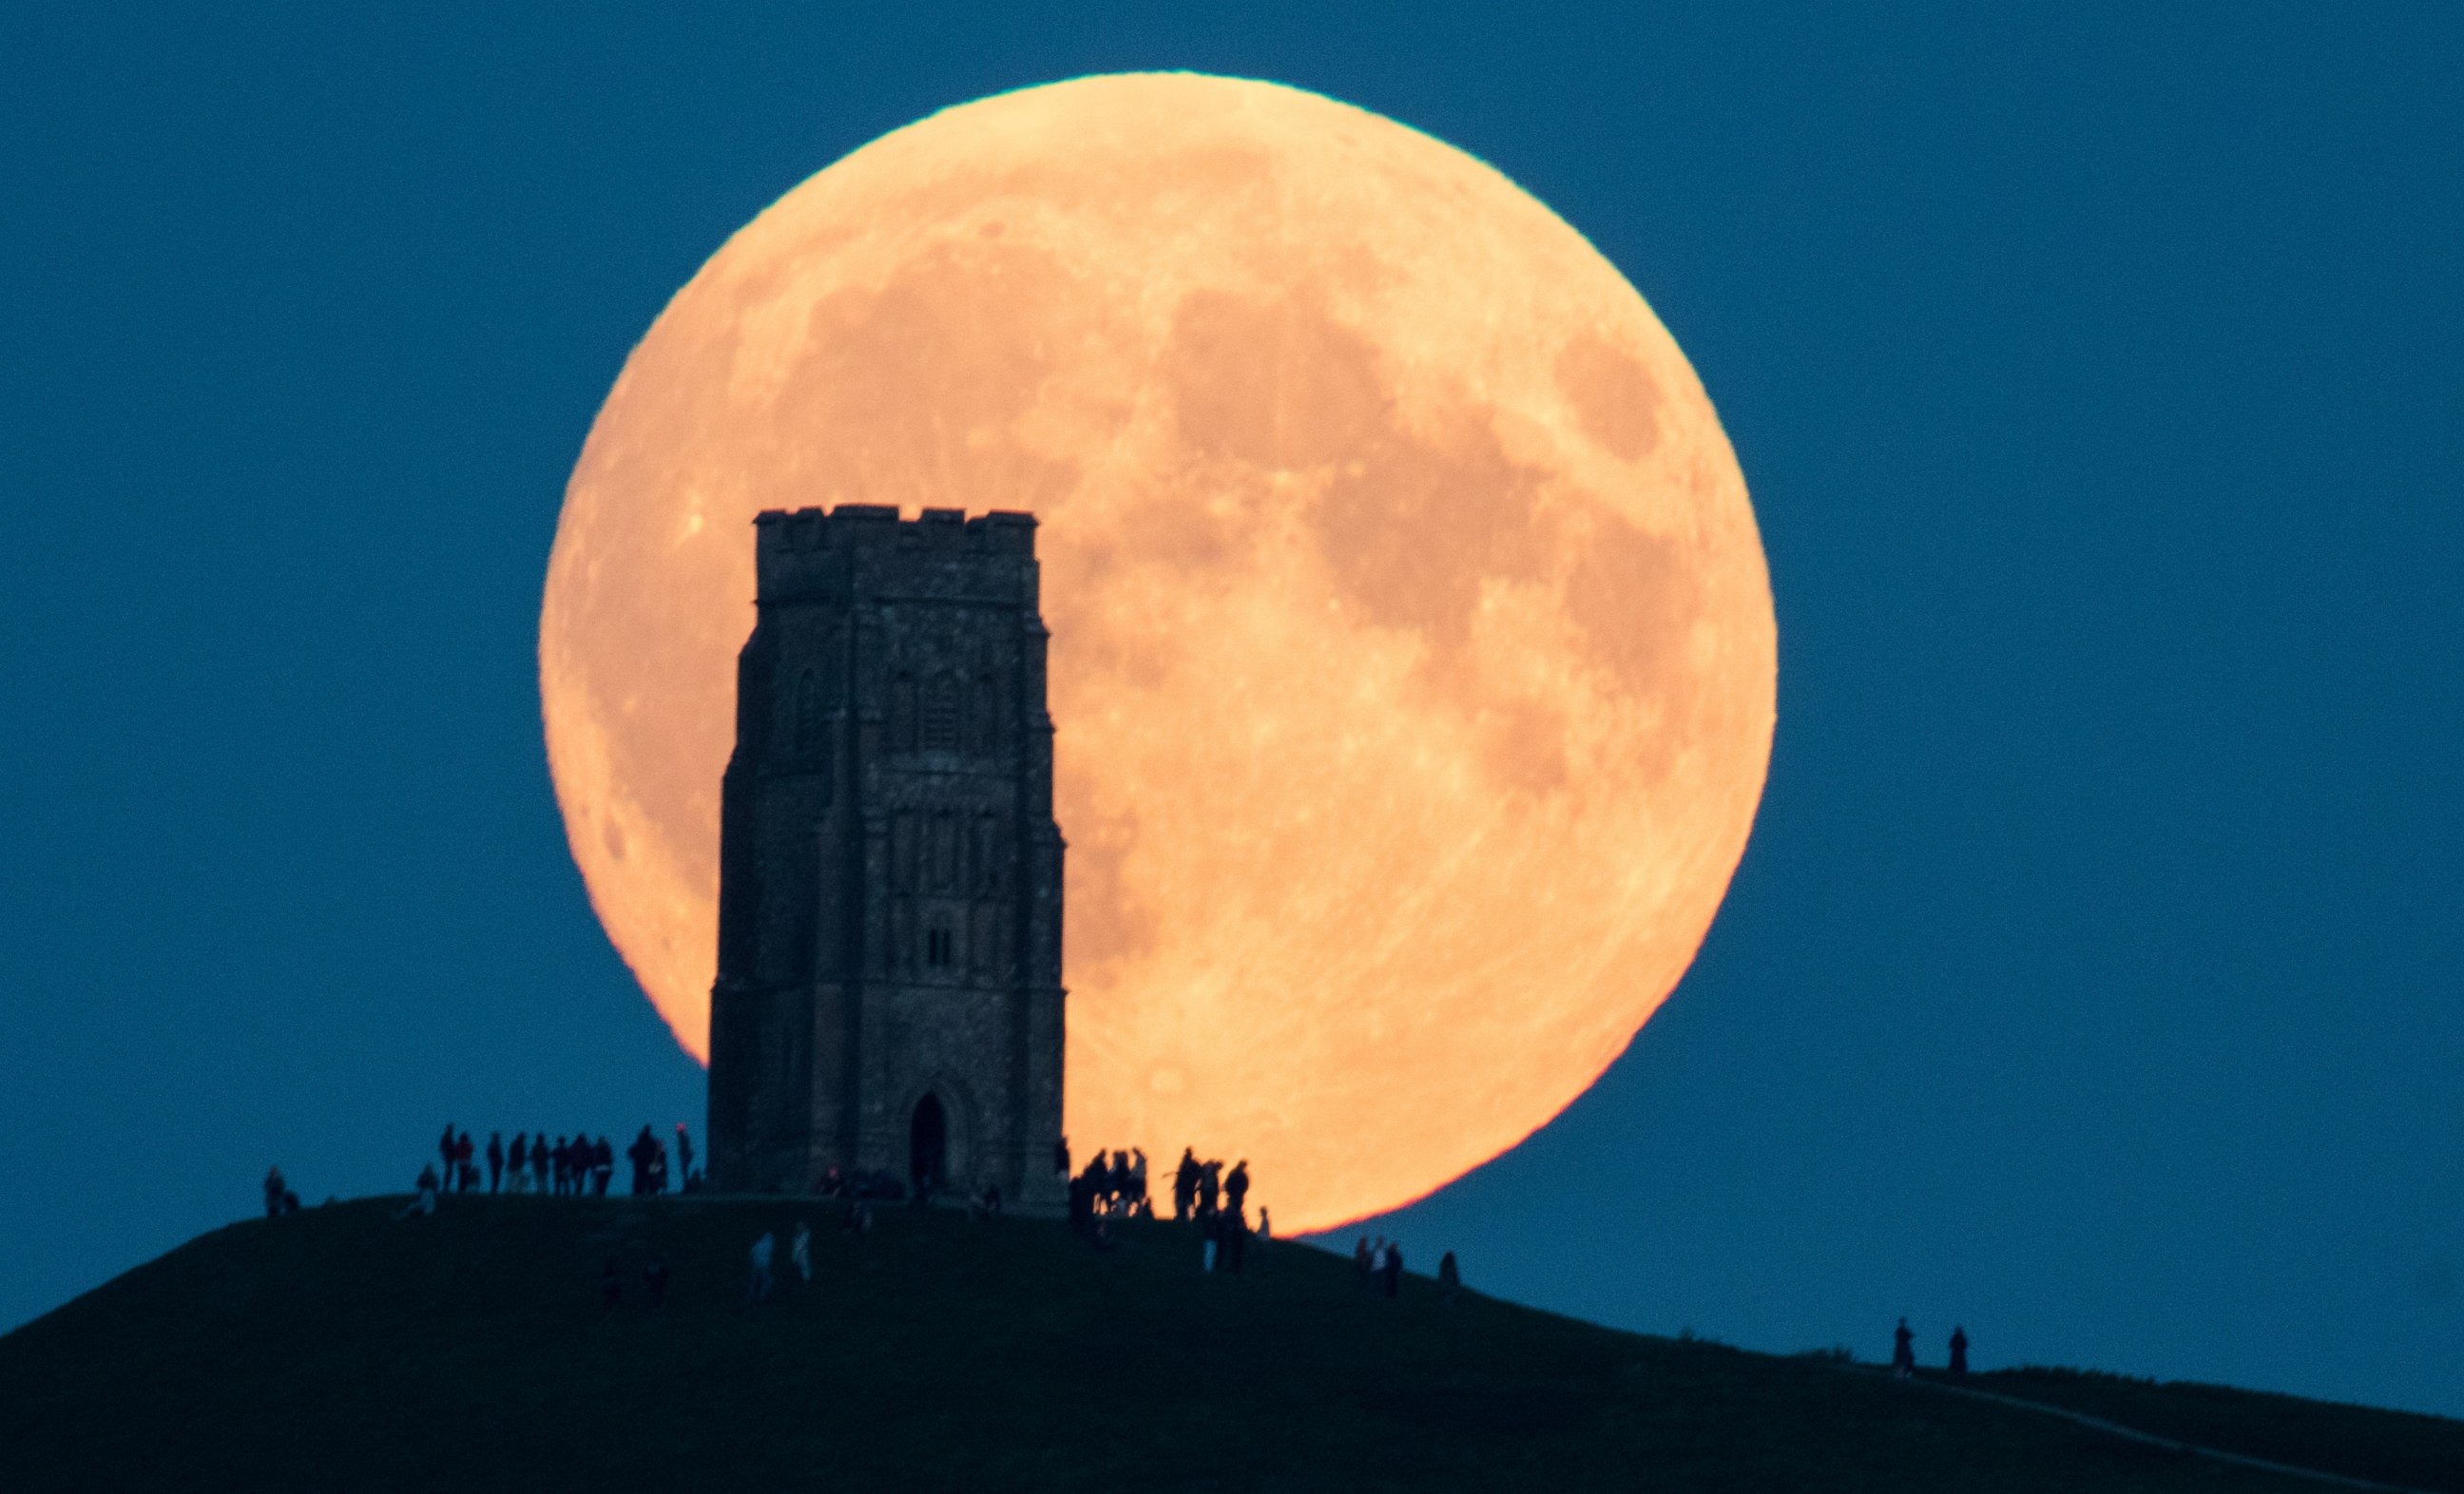 PHOTO: The supermoon rises behind Glastonbury Tor on September 28, 2015 in Somerset, England.